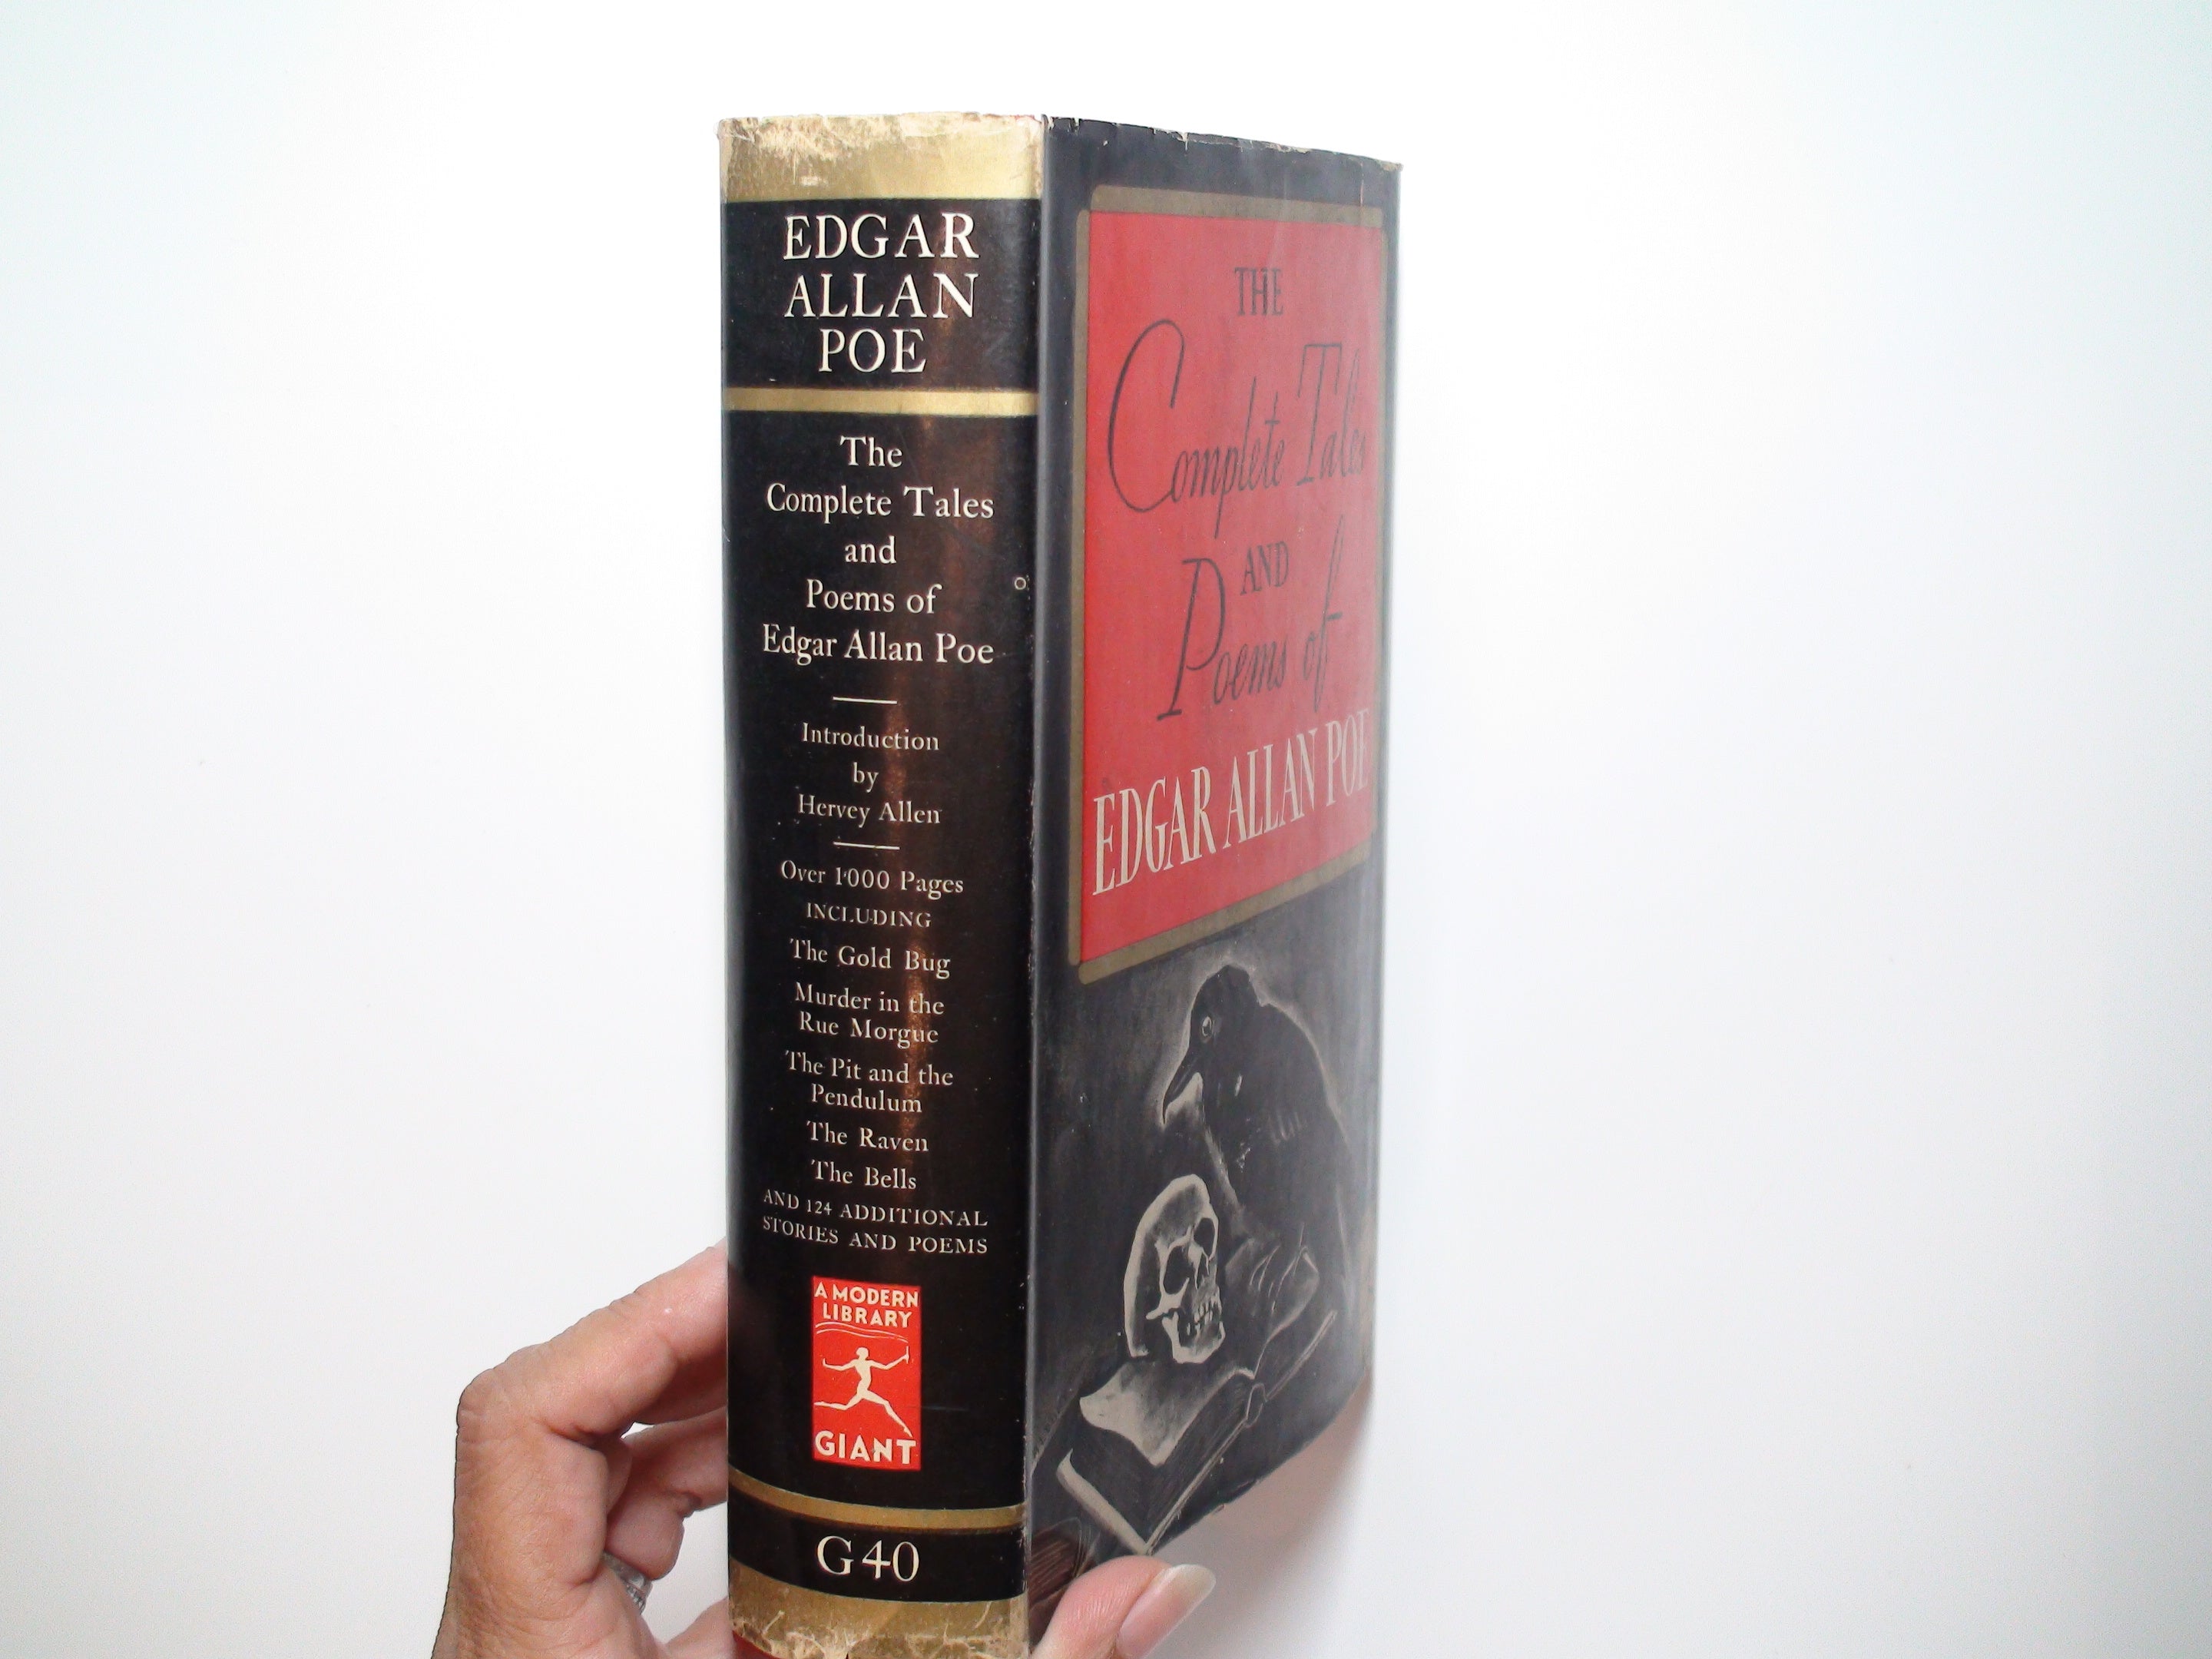 The Complete Tales and Poems of Edgar Allan Poe, Modern Library (GIANT), 1938